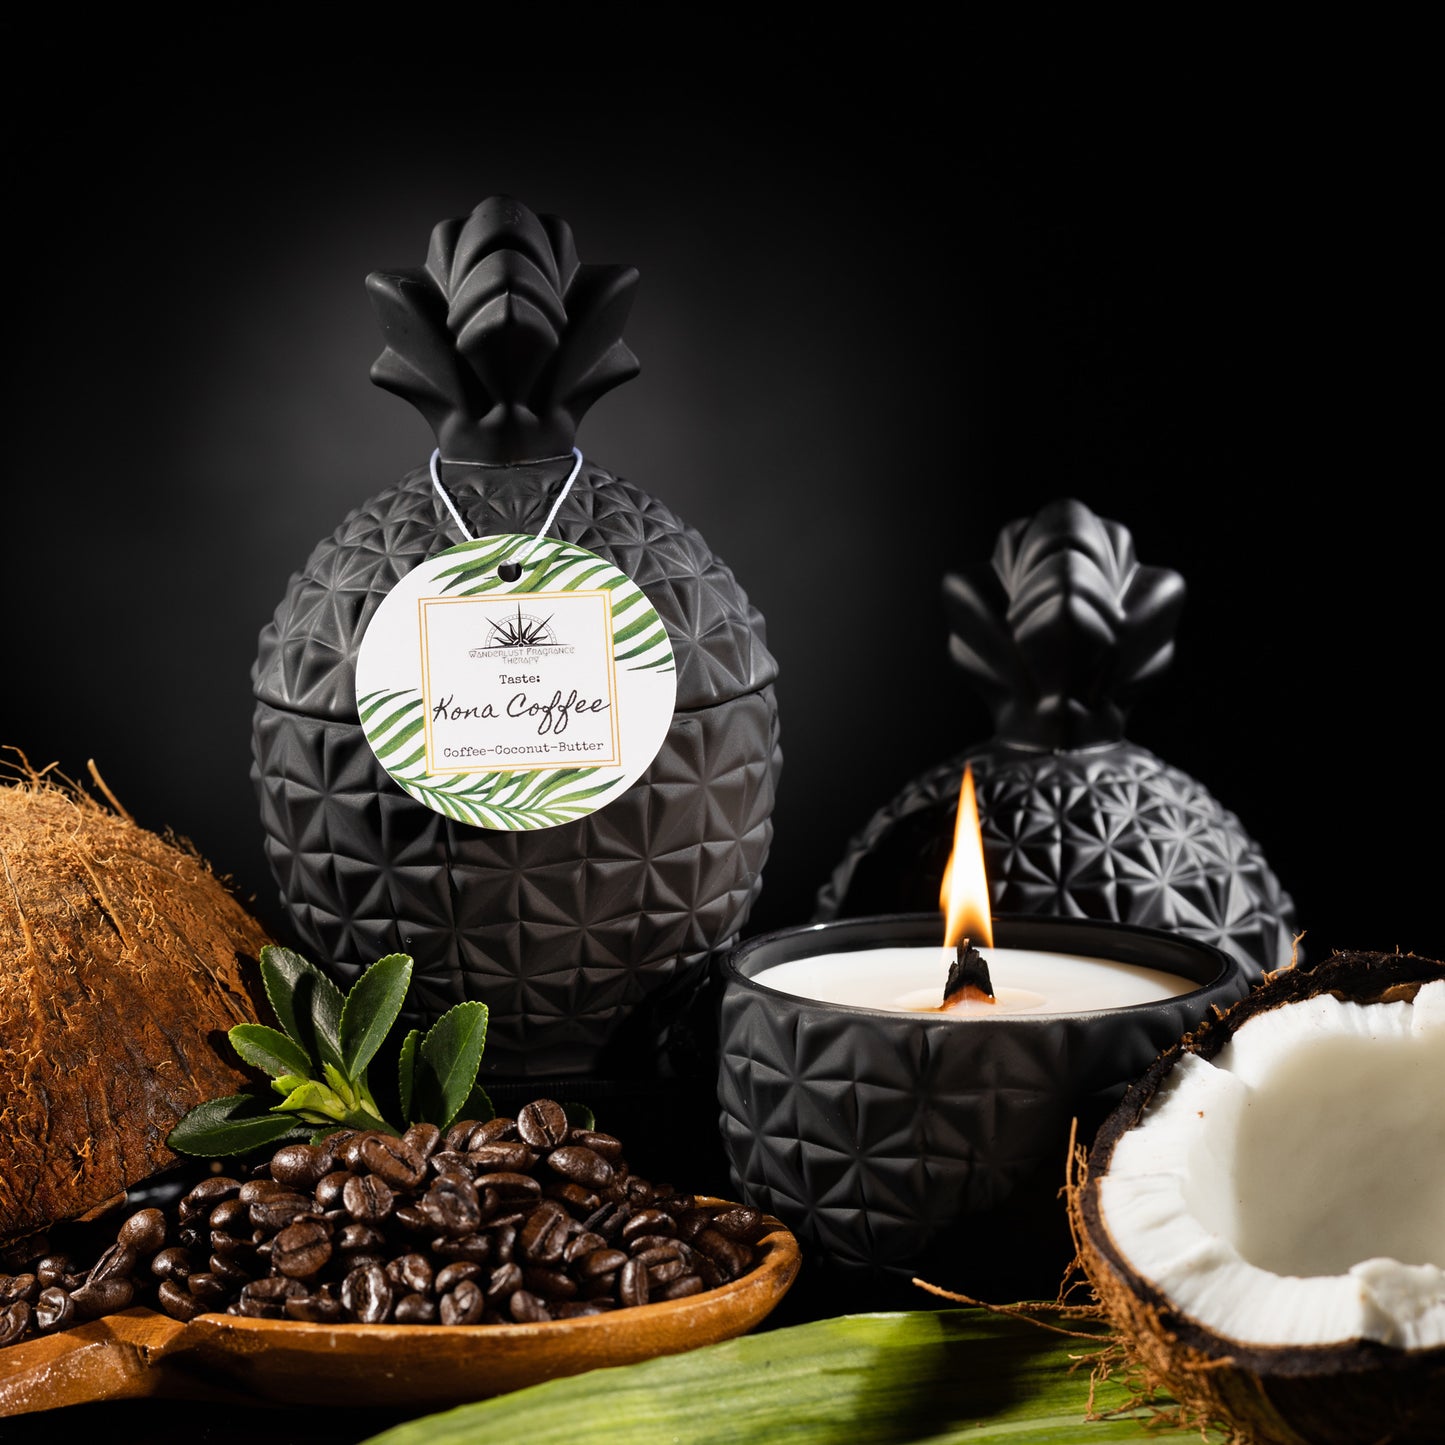 Candle in black pineapple jar scented with coffee, coconut and butter